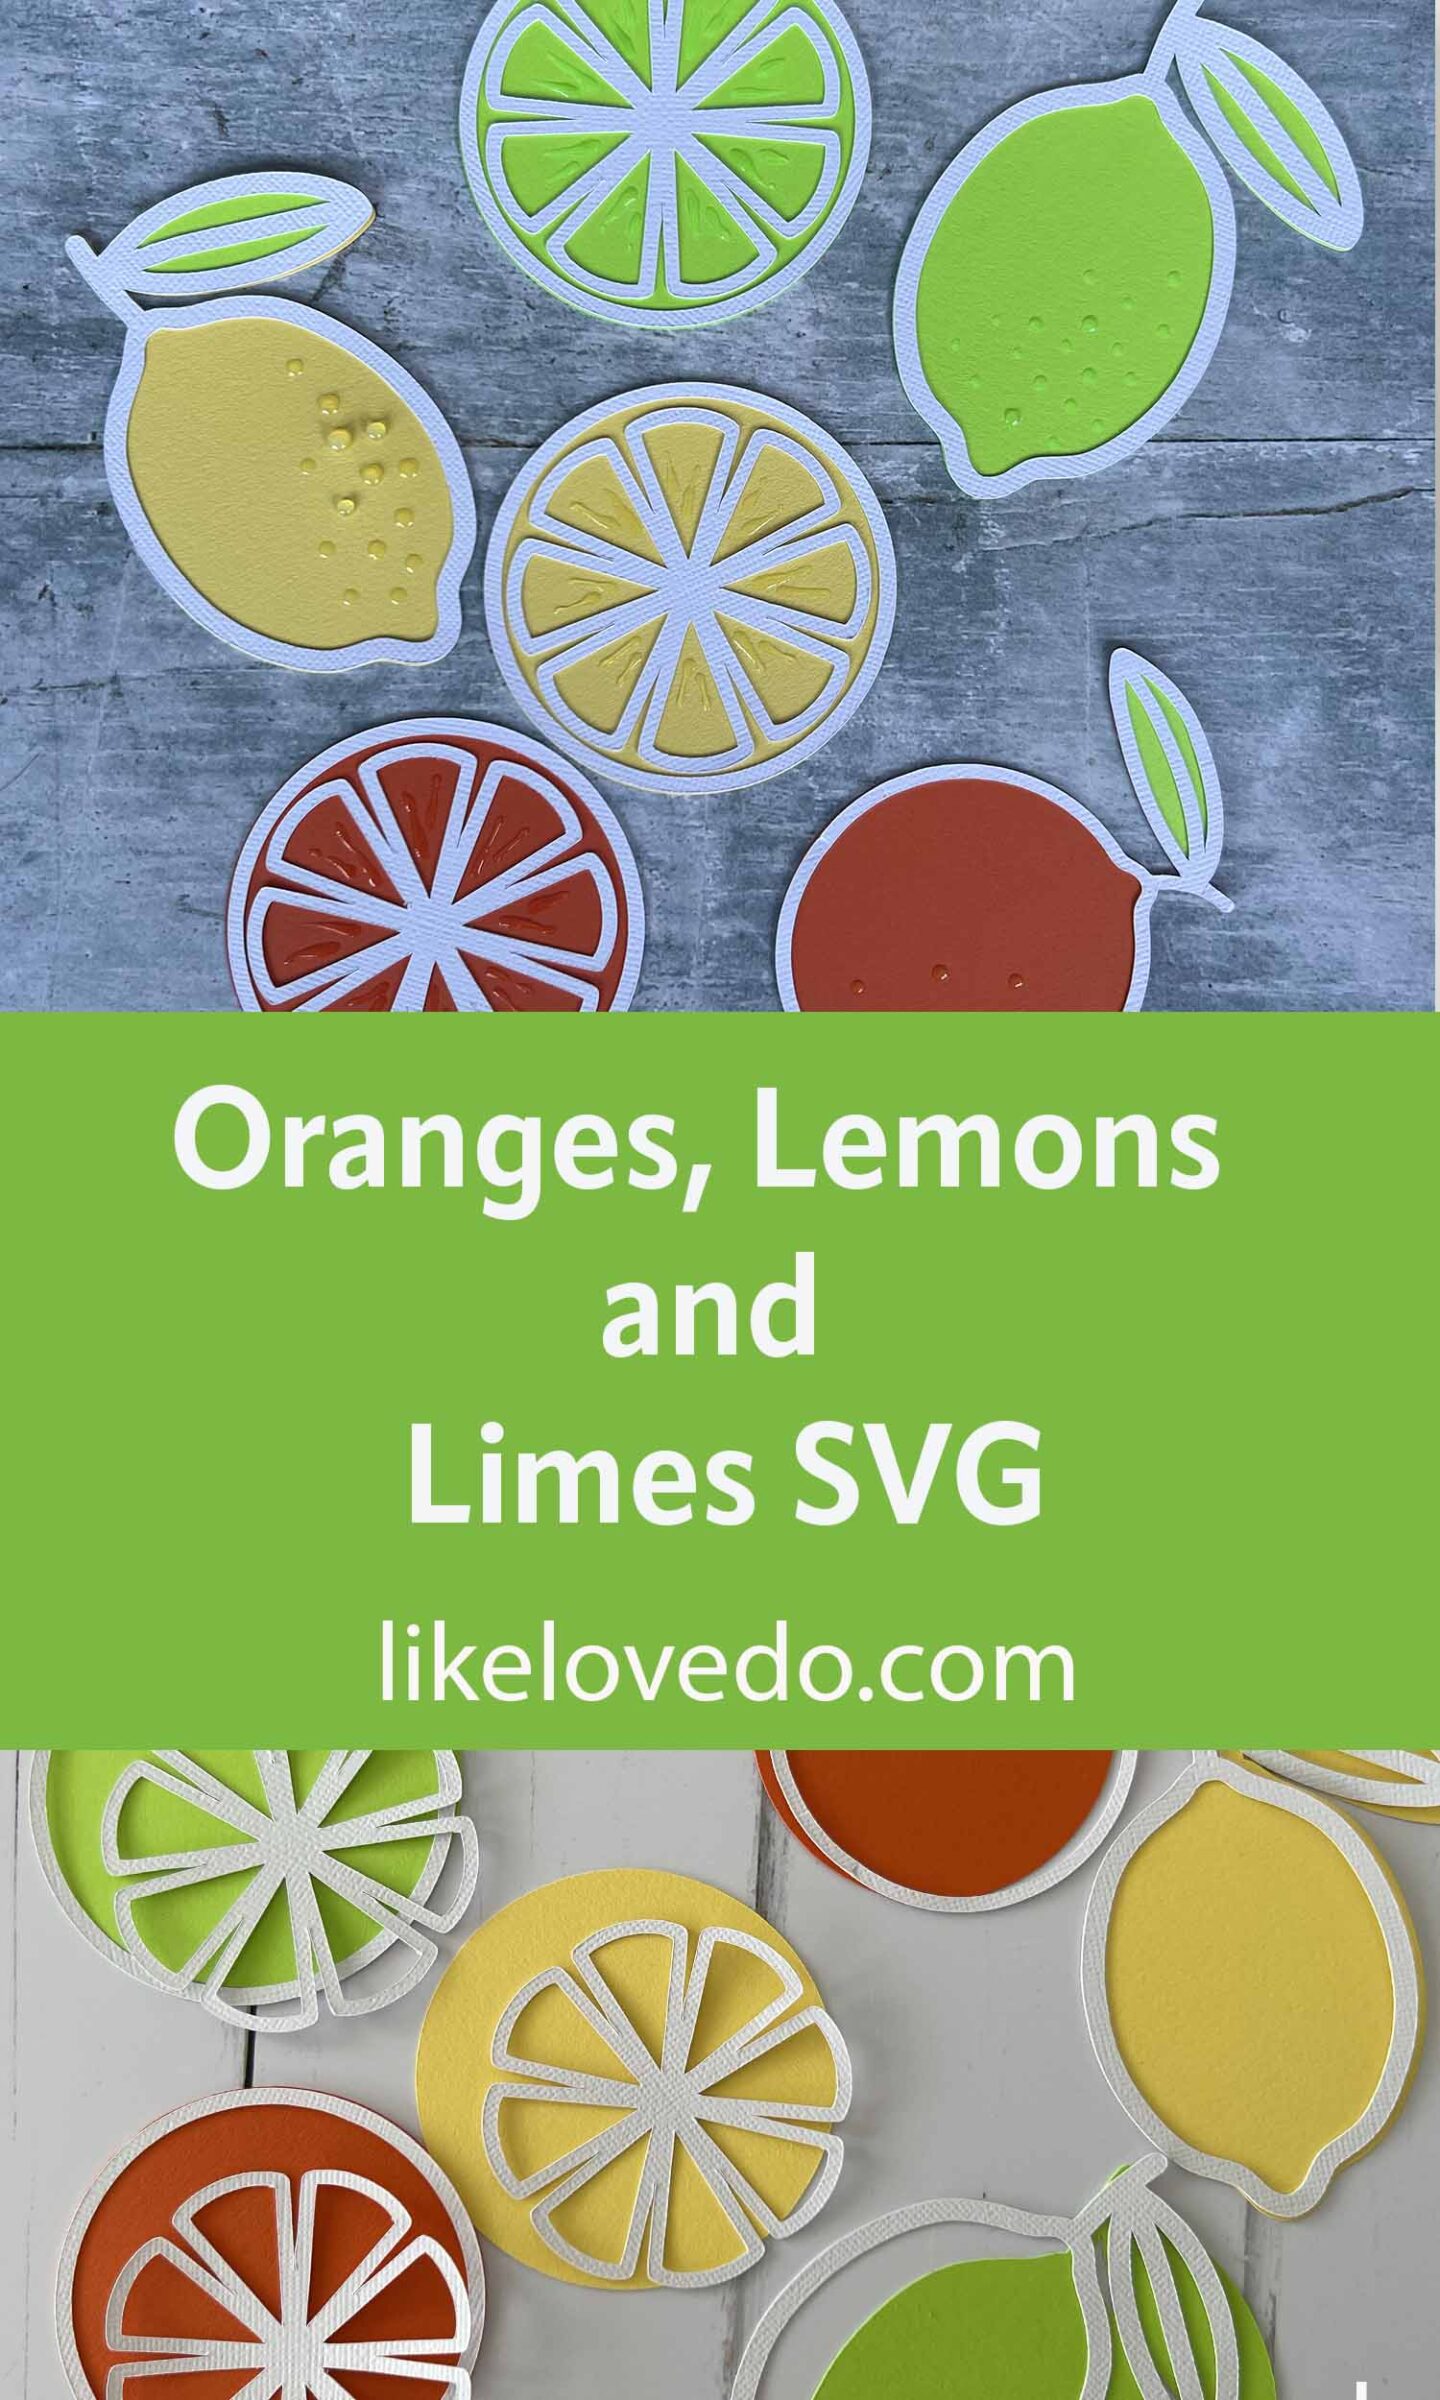 Layered Citrus Fruits SVGS of oranges, lemons, and limes in a pin image